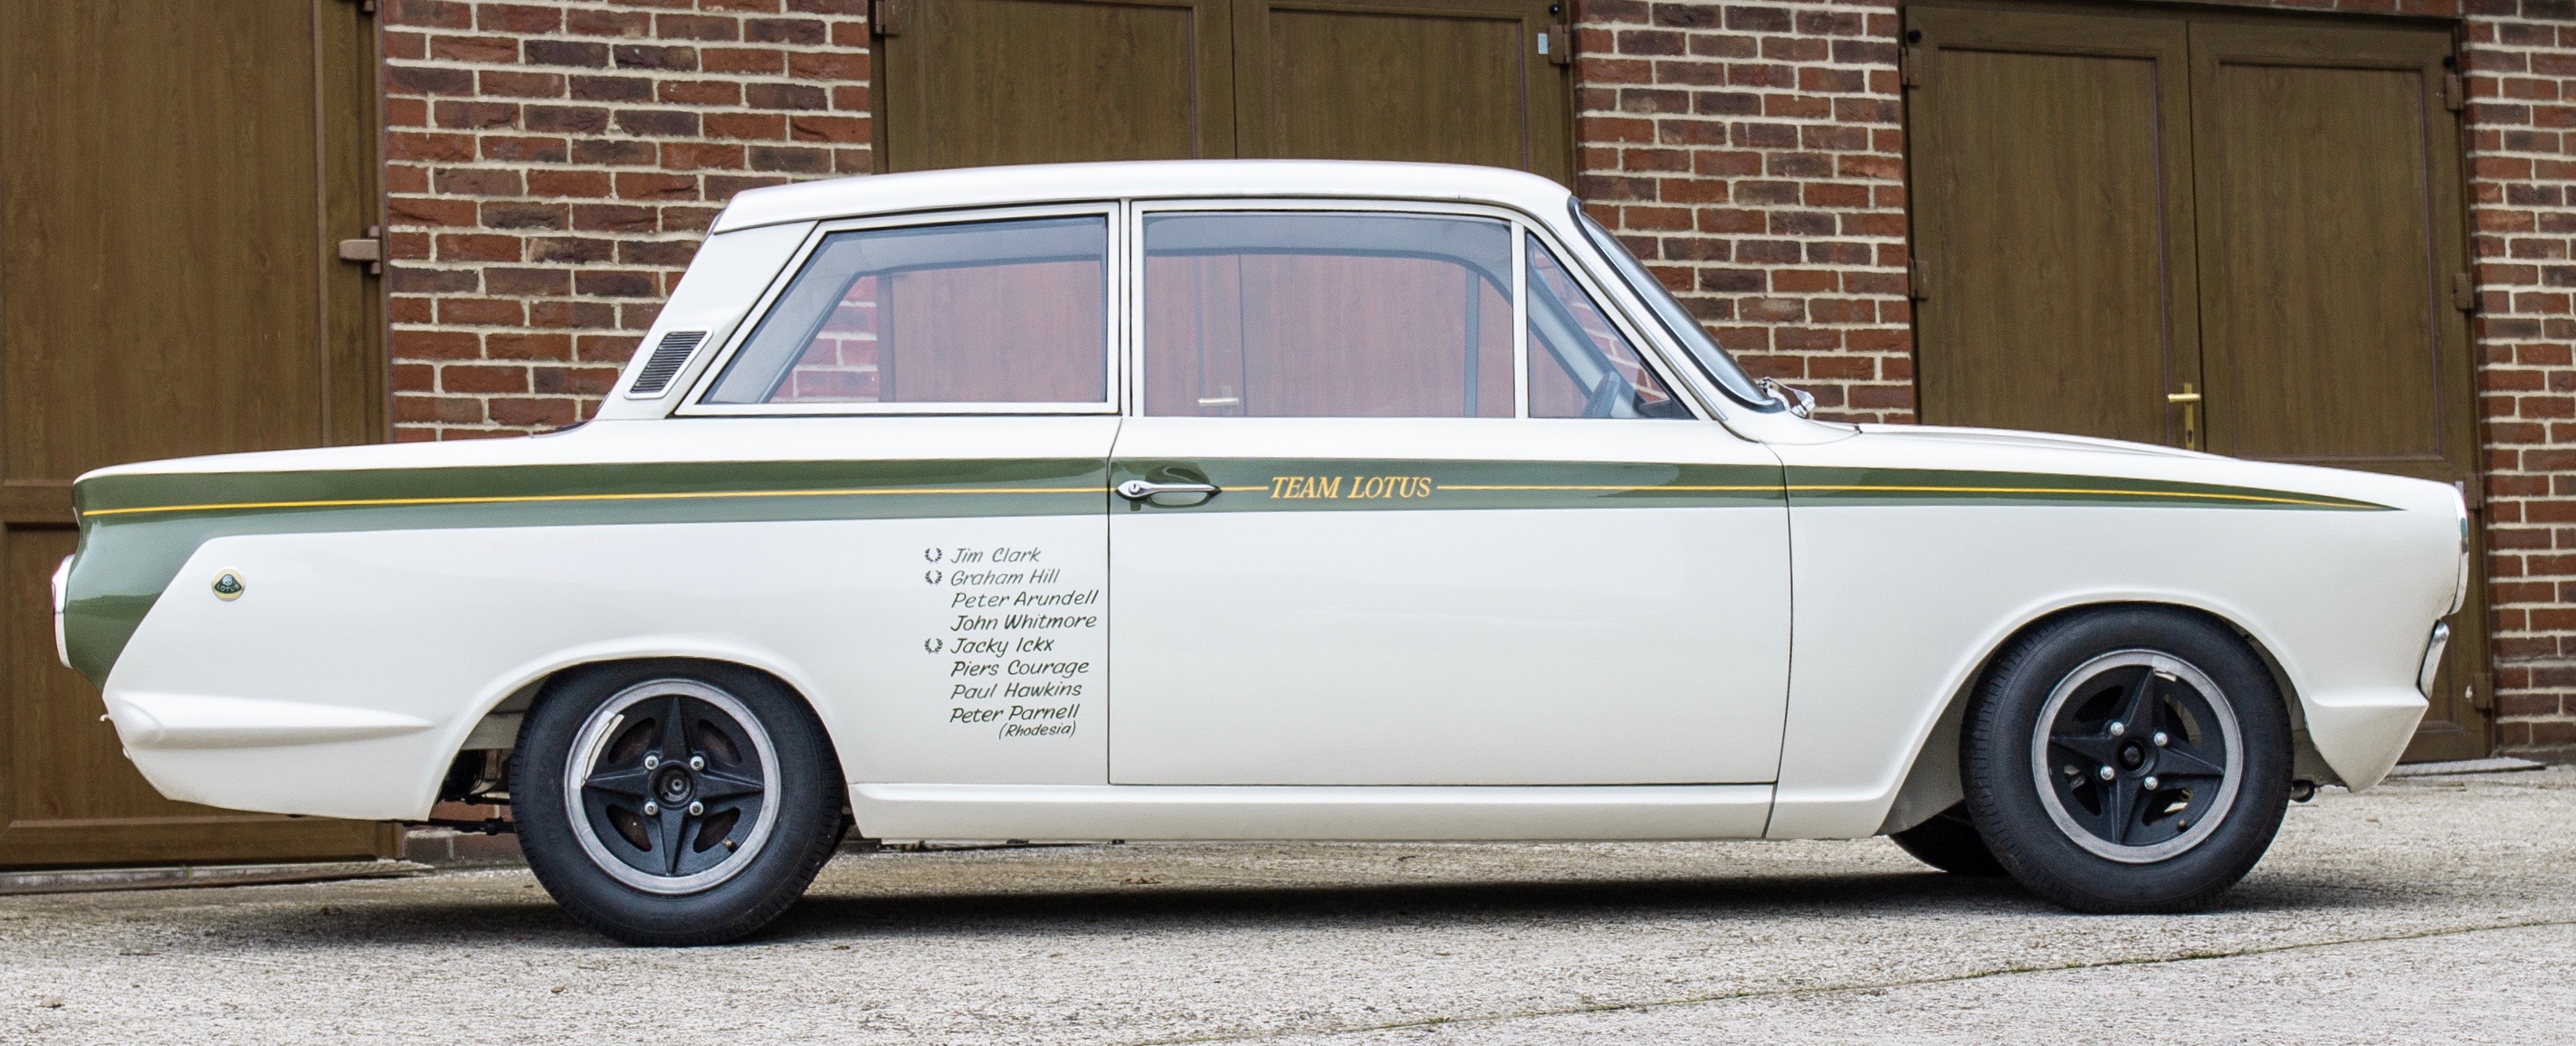 Lotus, Works Lotus Cortina headed to auction, ClassicCars.com Journal